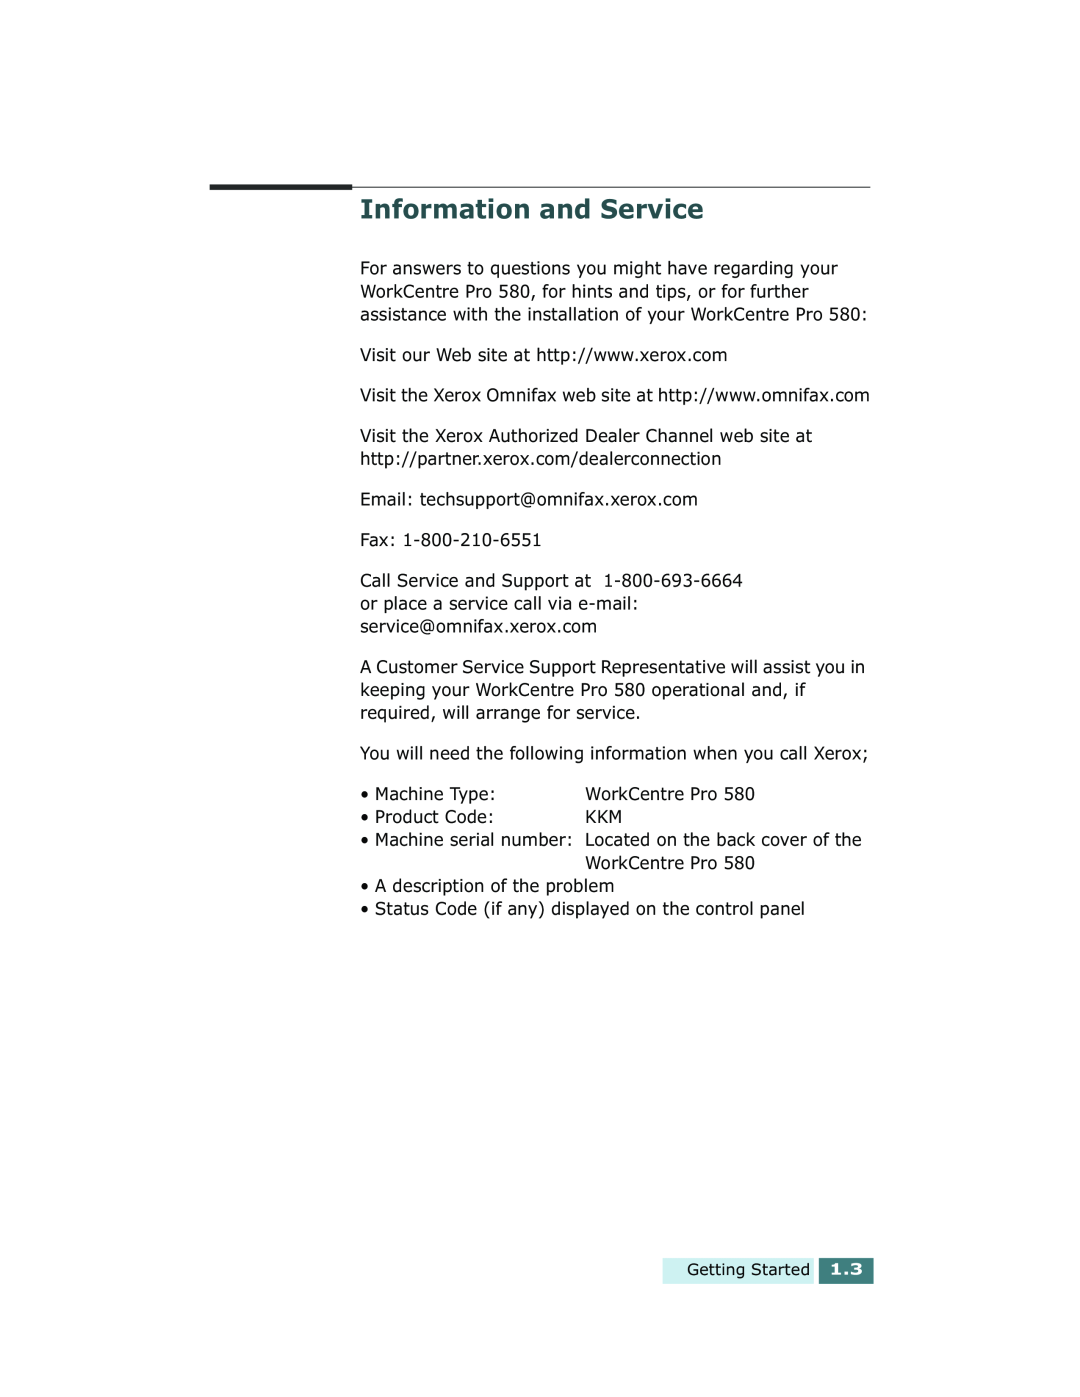 Xerox Pro 580 manual Information and Service 